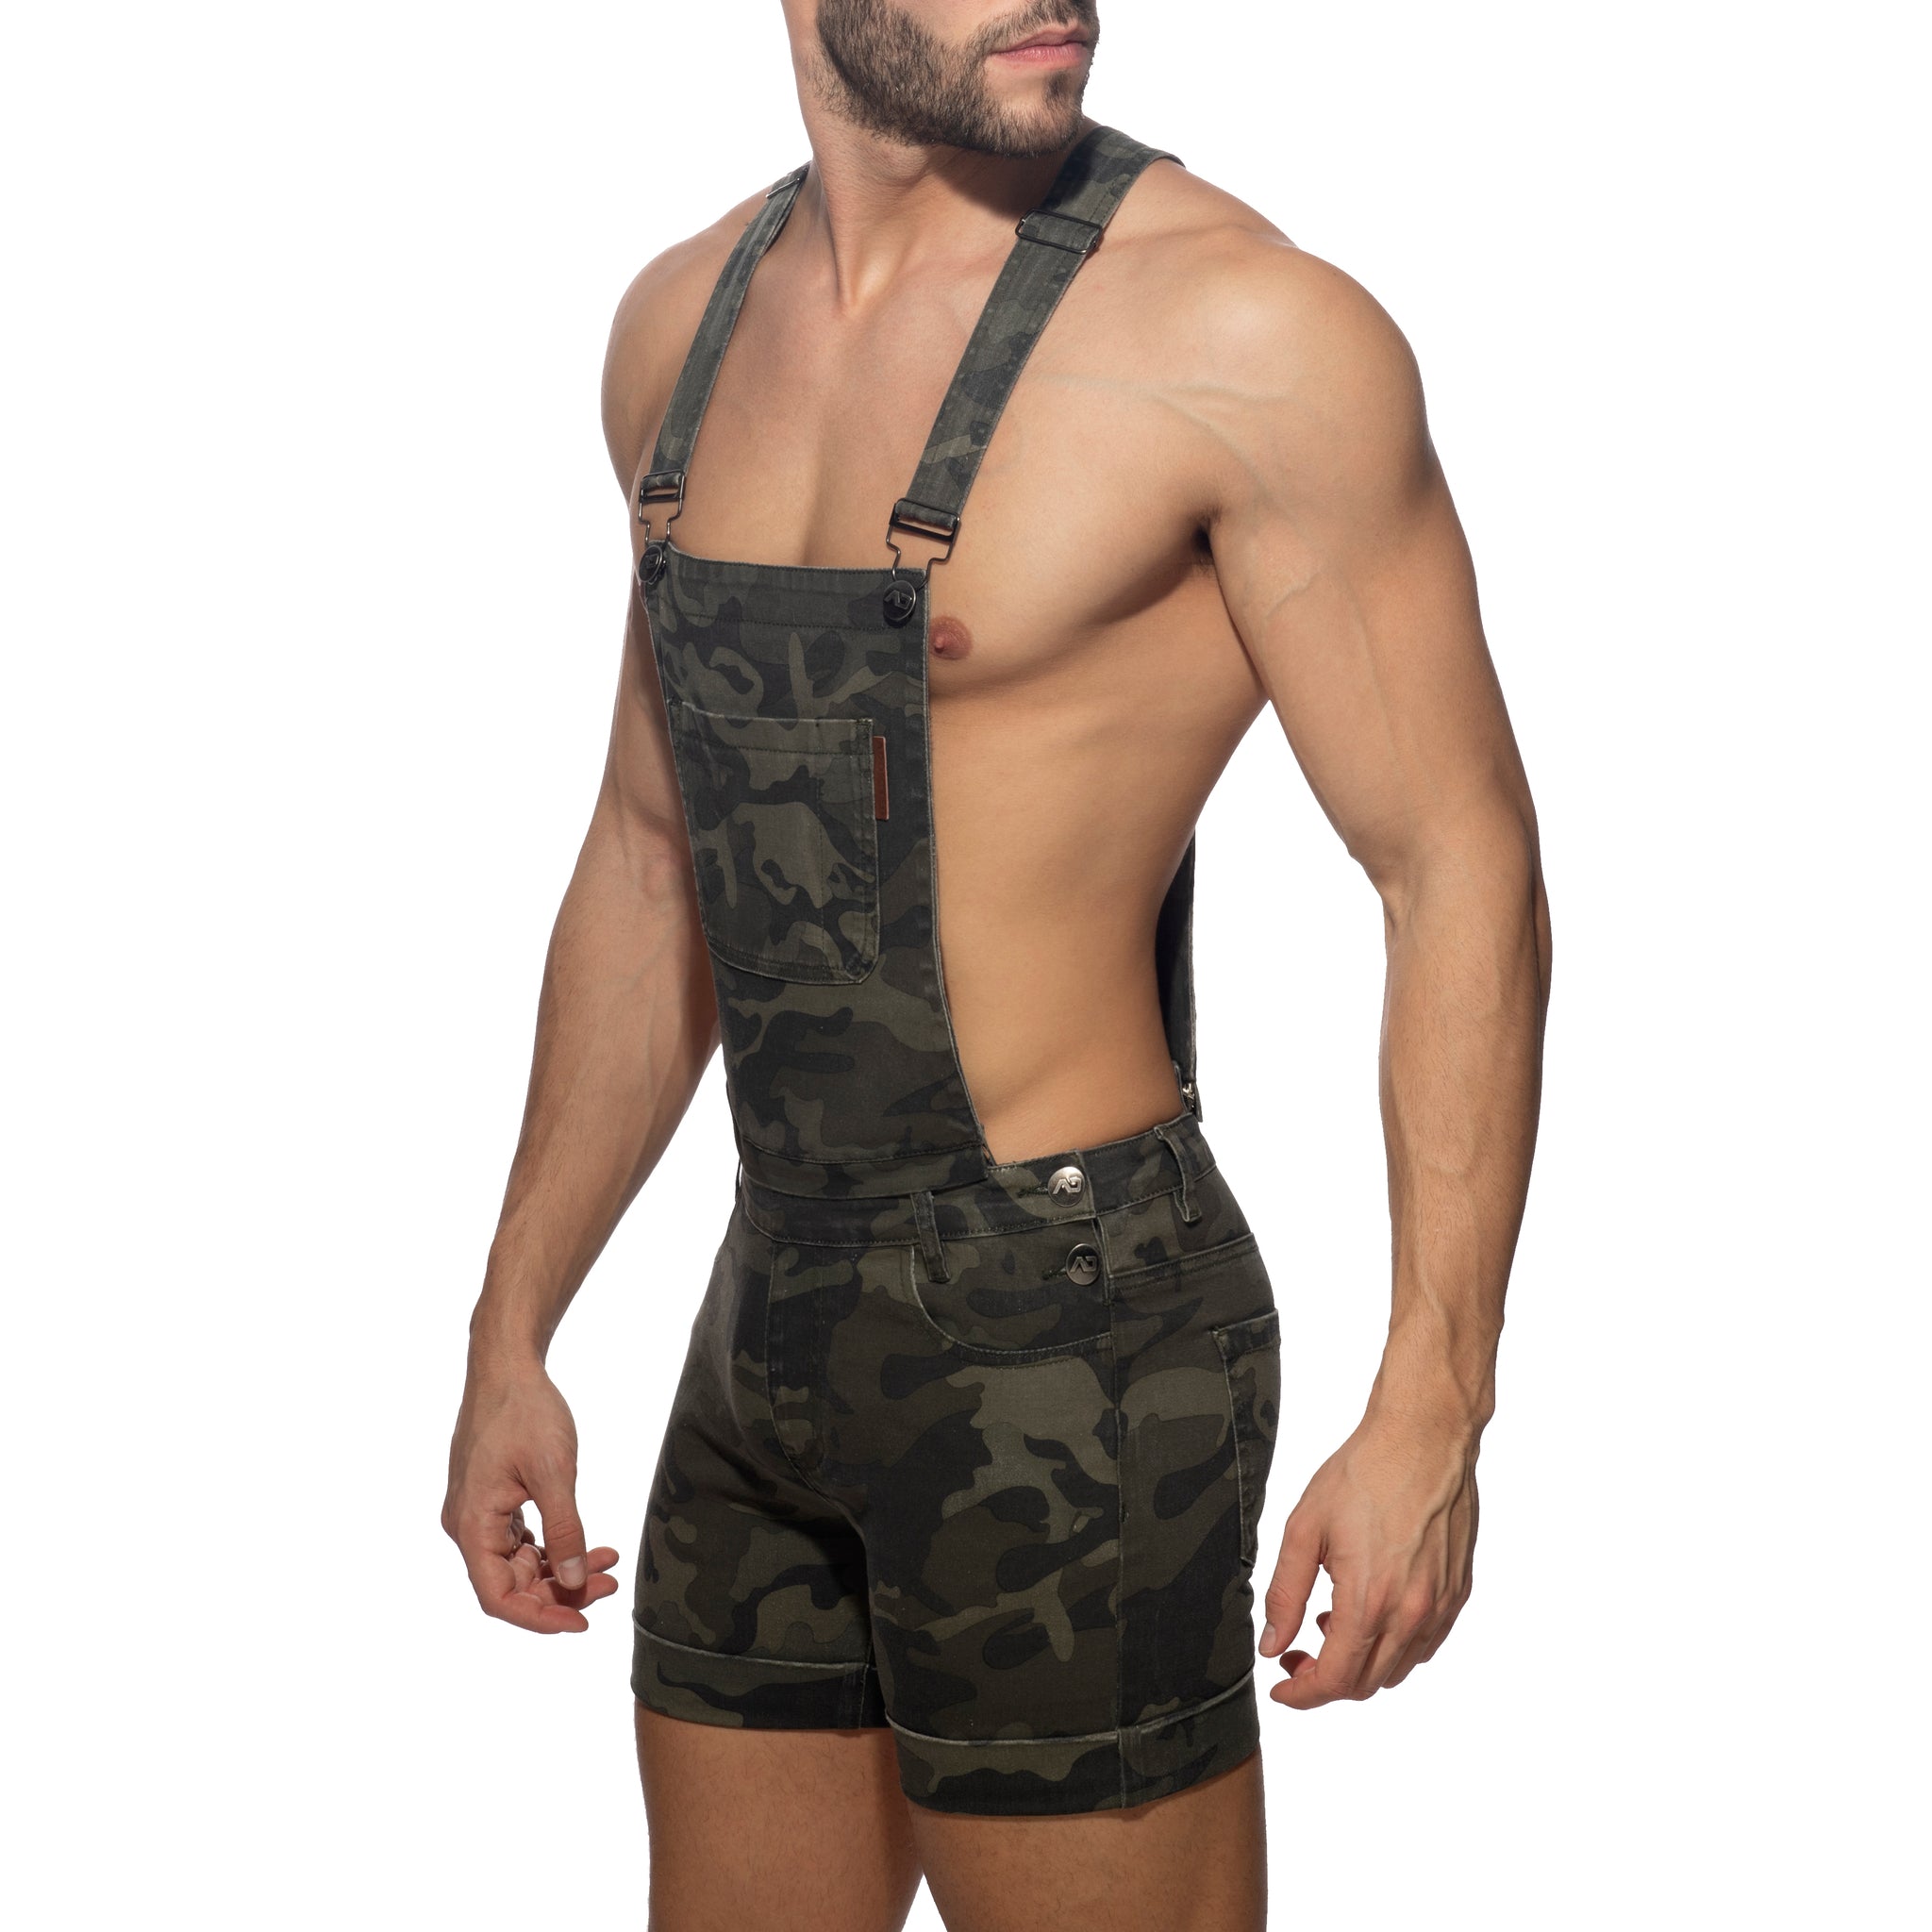 Addicted Removable Overalls Camo Jeans Camouflage AD1161